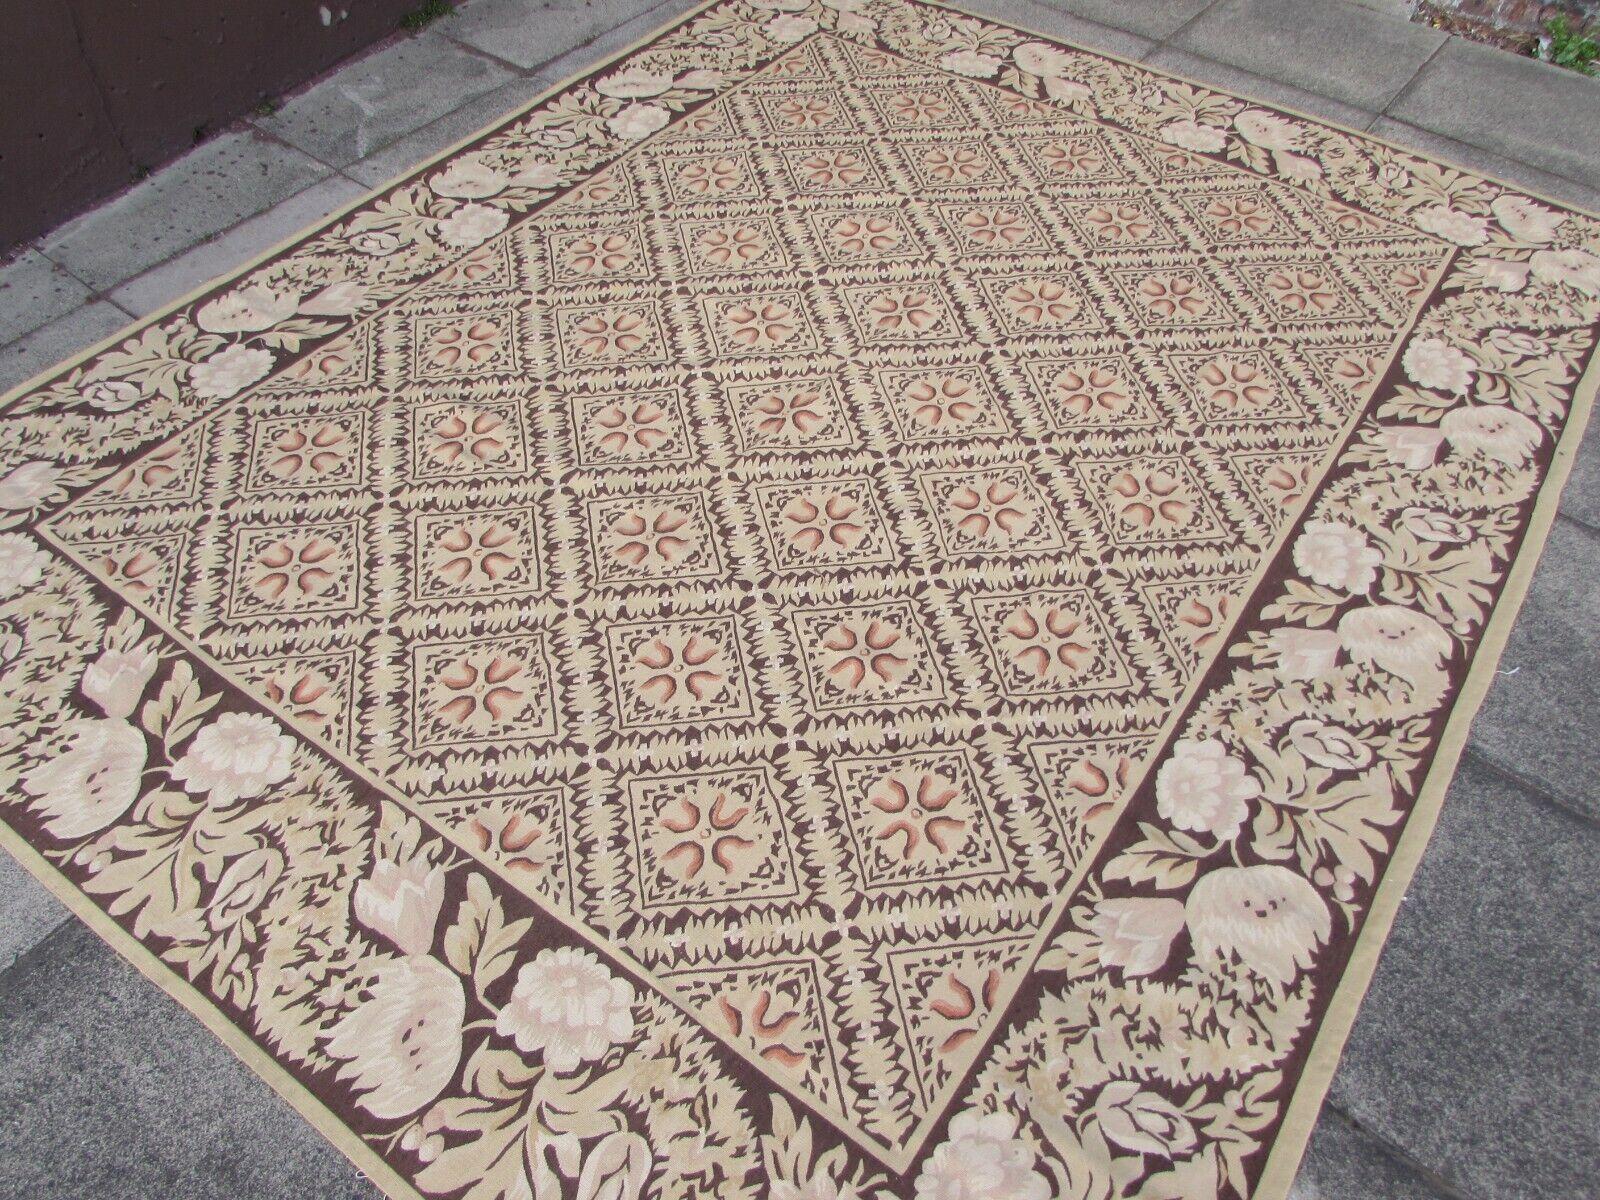 This Vintage 1970s Handmade French Aubusson Flatweave Rug is a testament to the enduring beauty of traditional French design. Measuring 7.9' x 9.8' (243 x 300 cm), this rug is a true work of art. It carries the essence of an old hand-made French